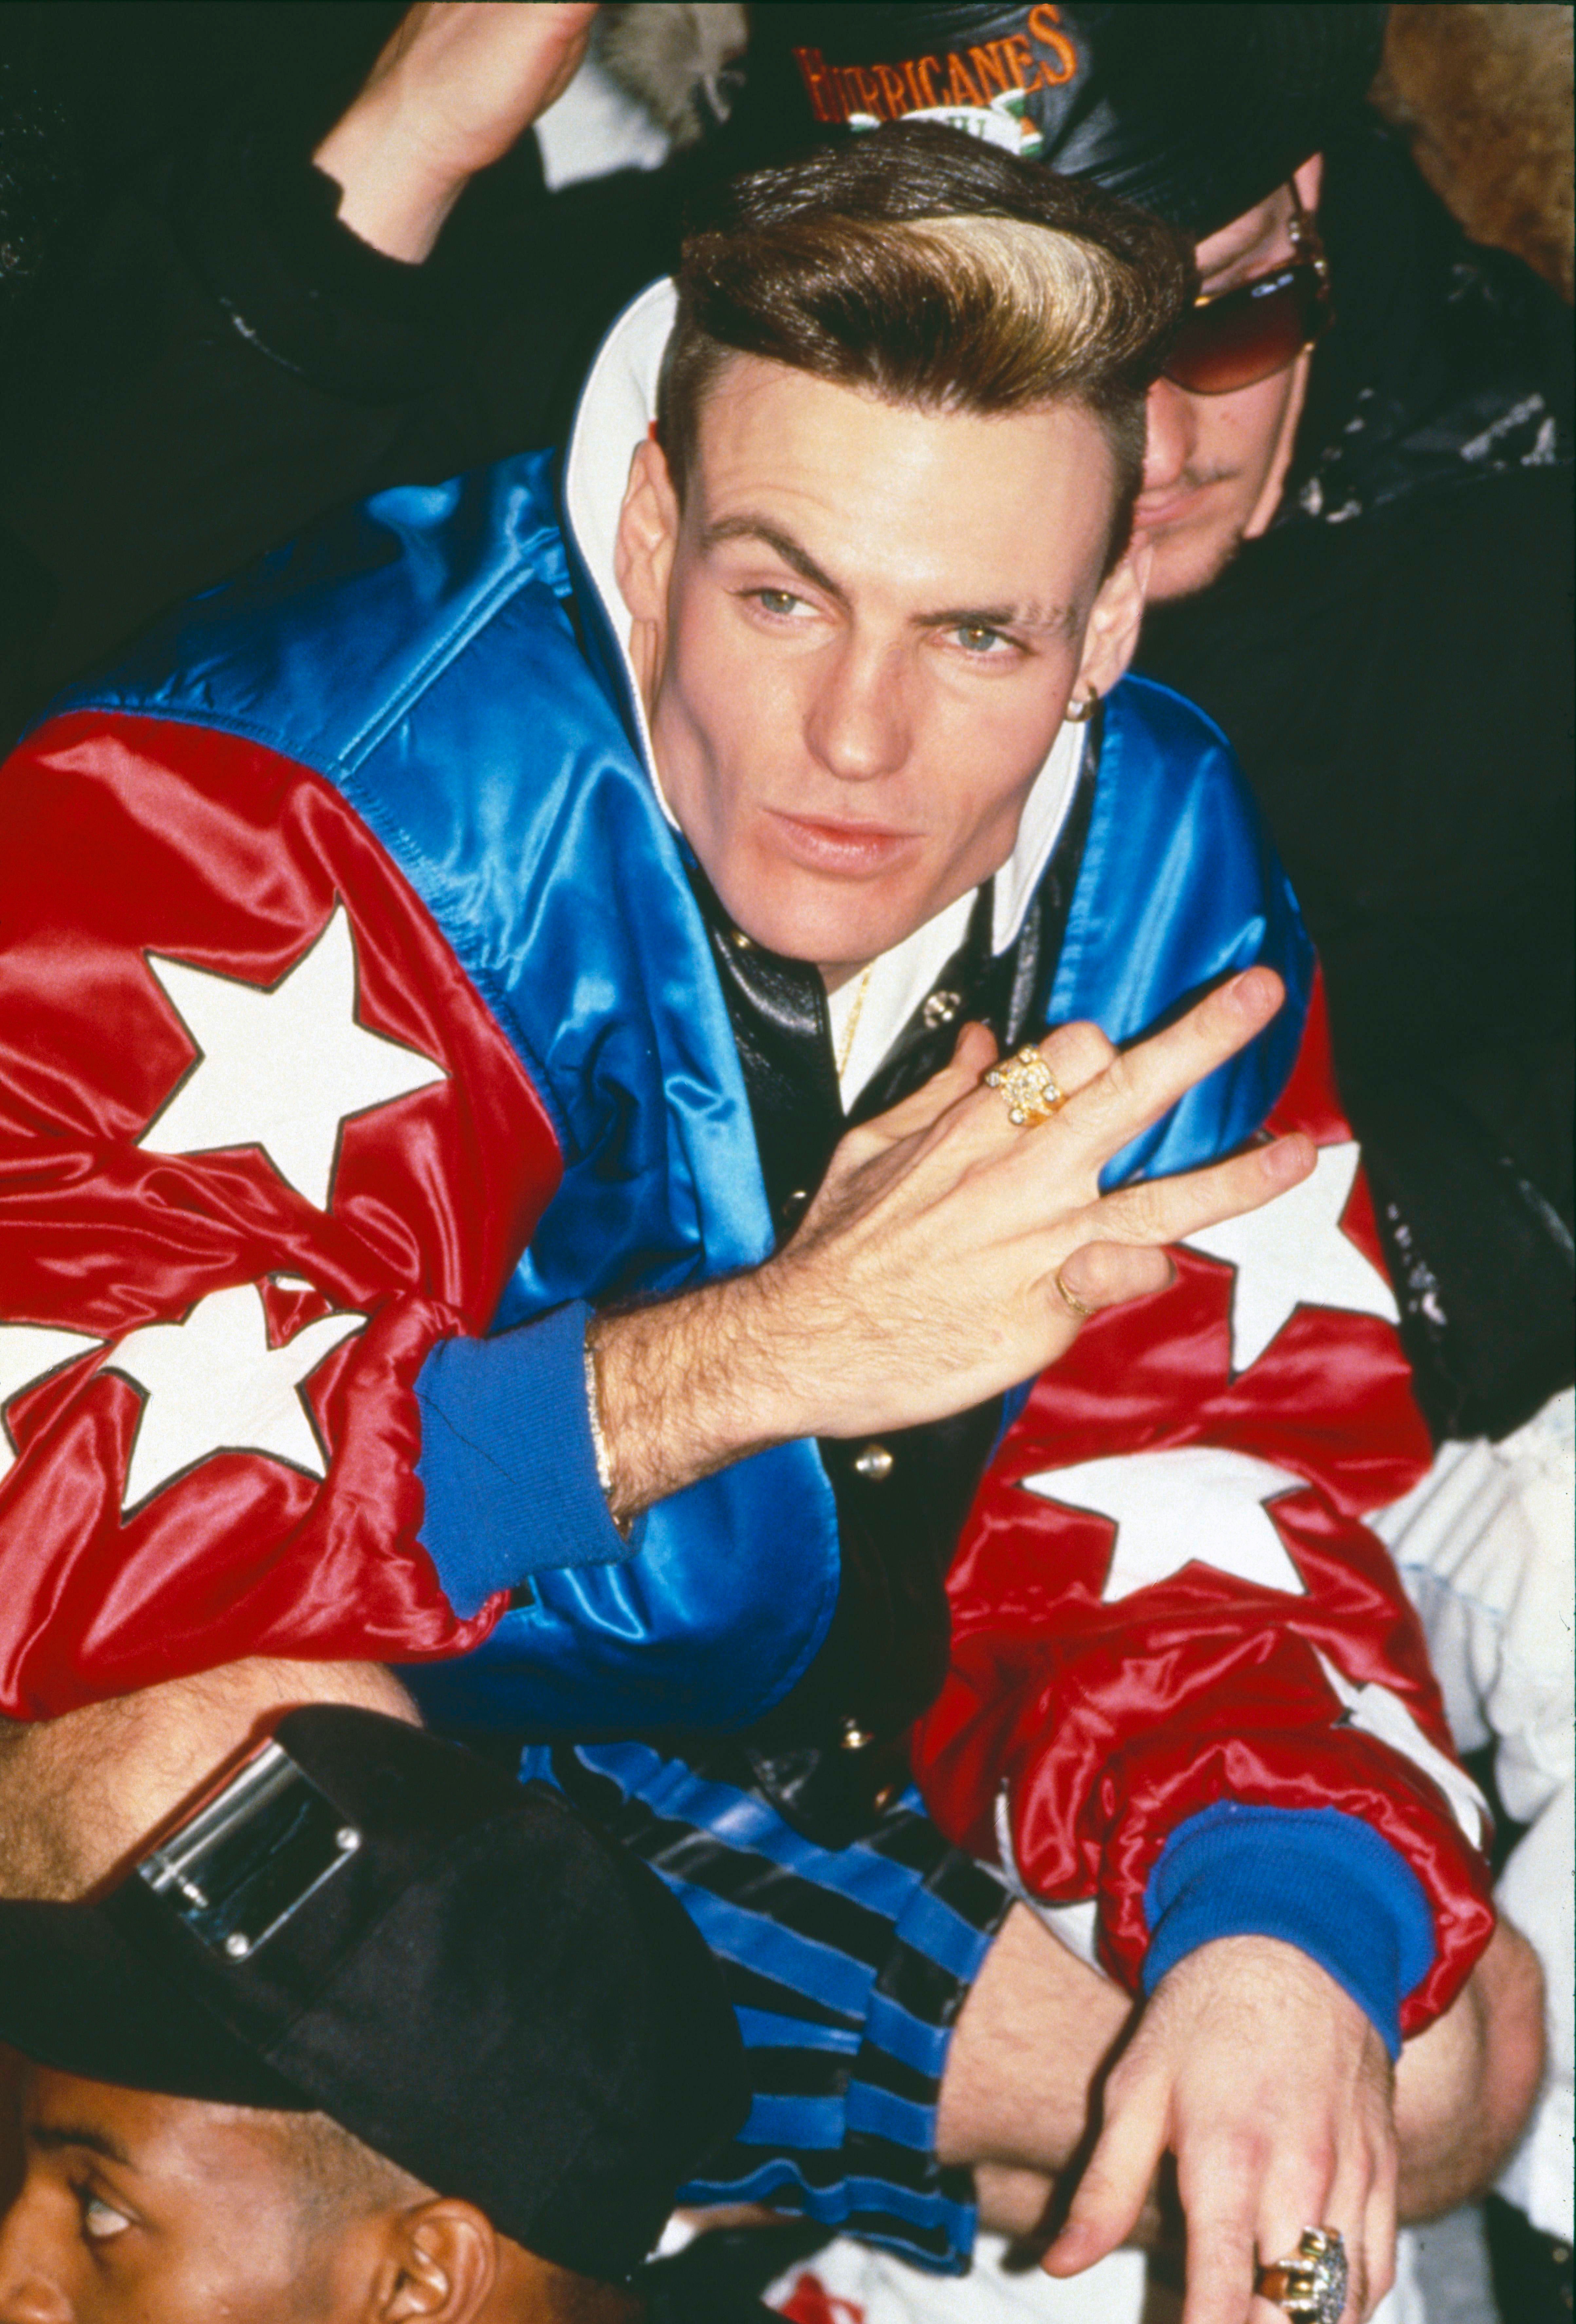 Rapper Vanilla Ice is best-known for 1990 hit Ice Ice Baby